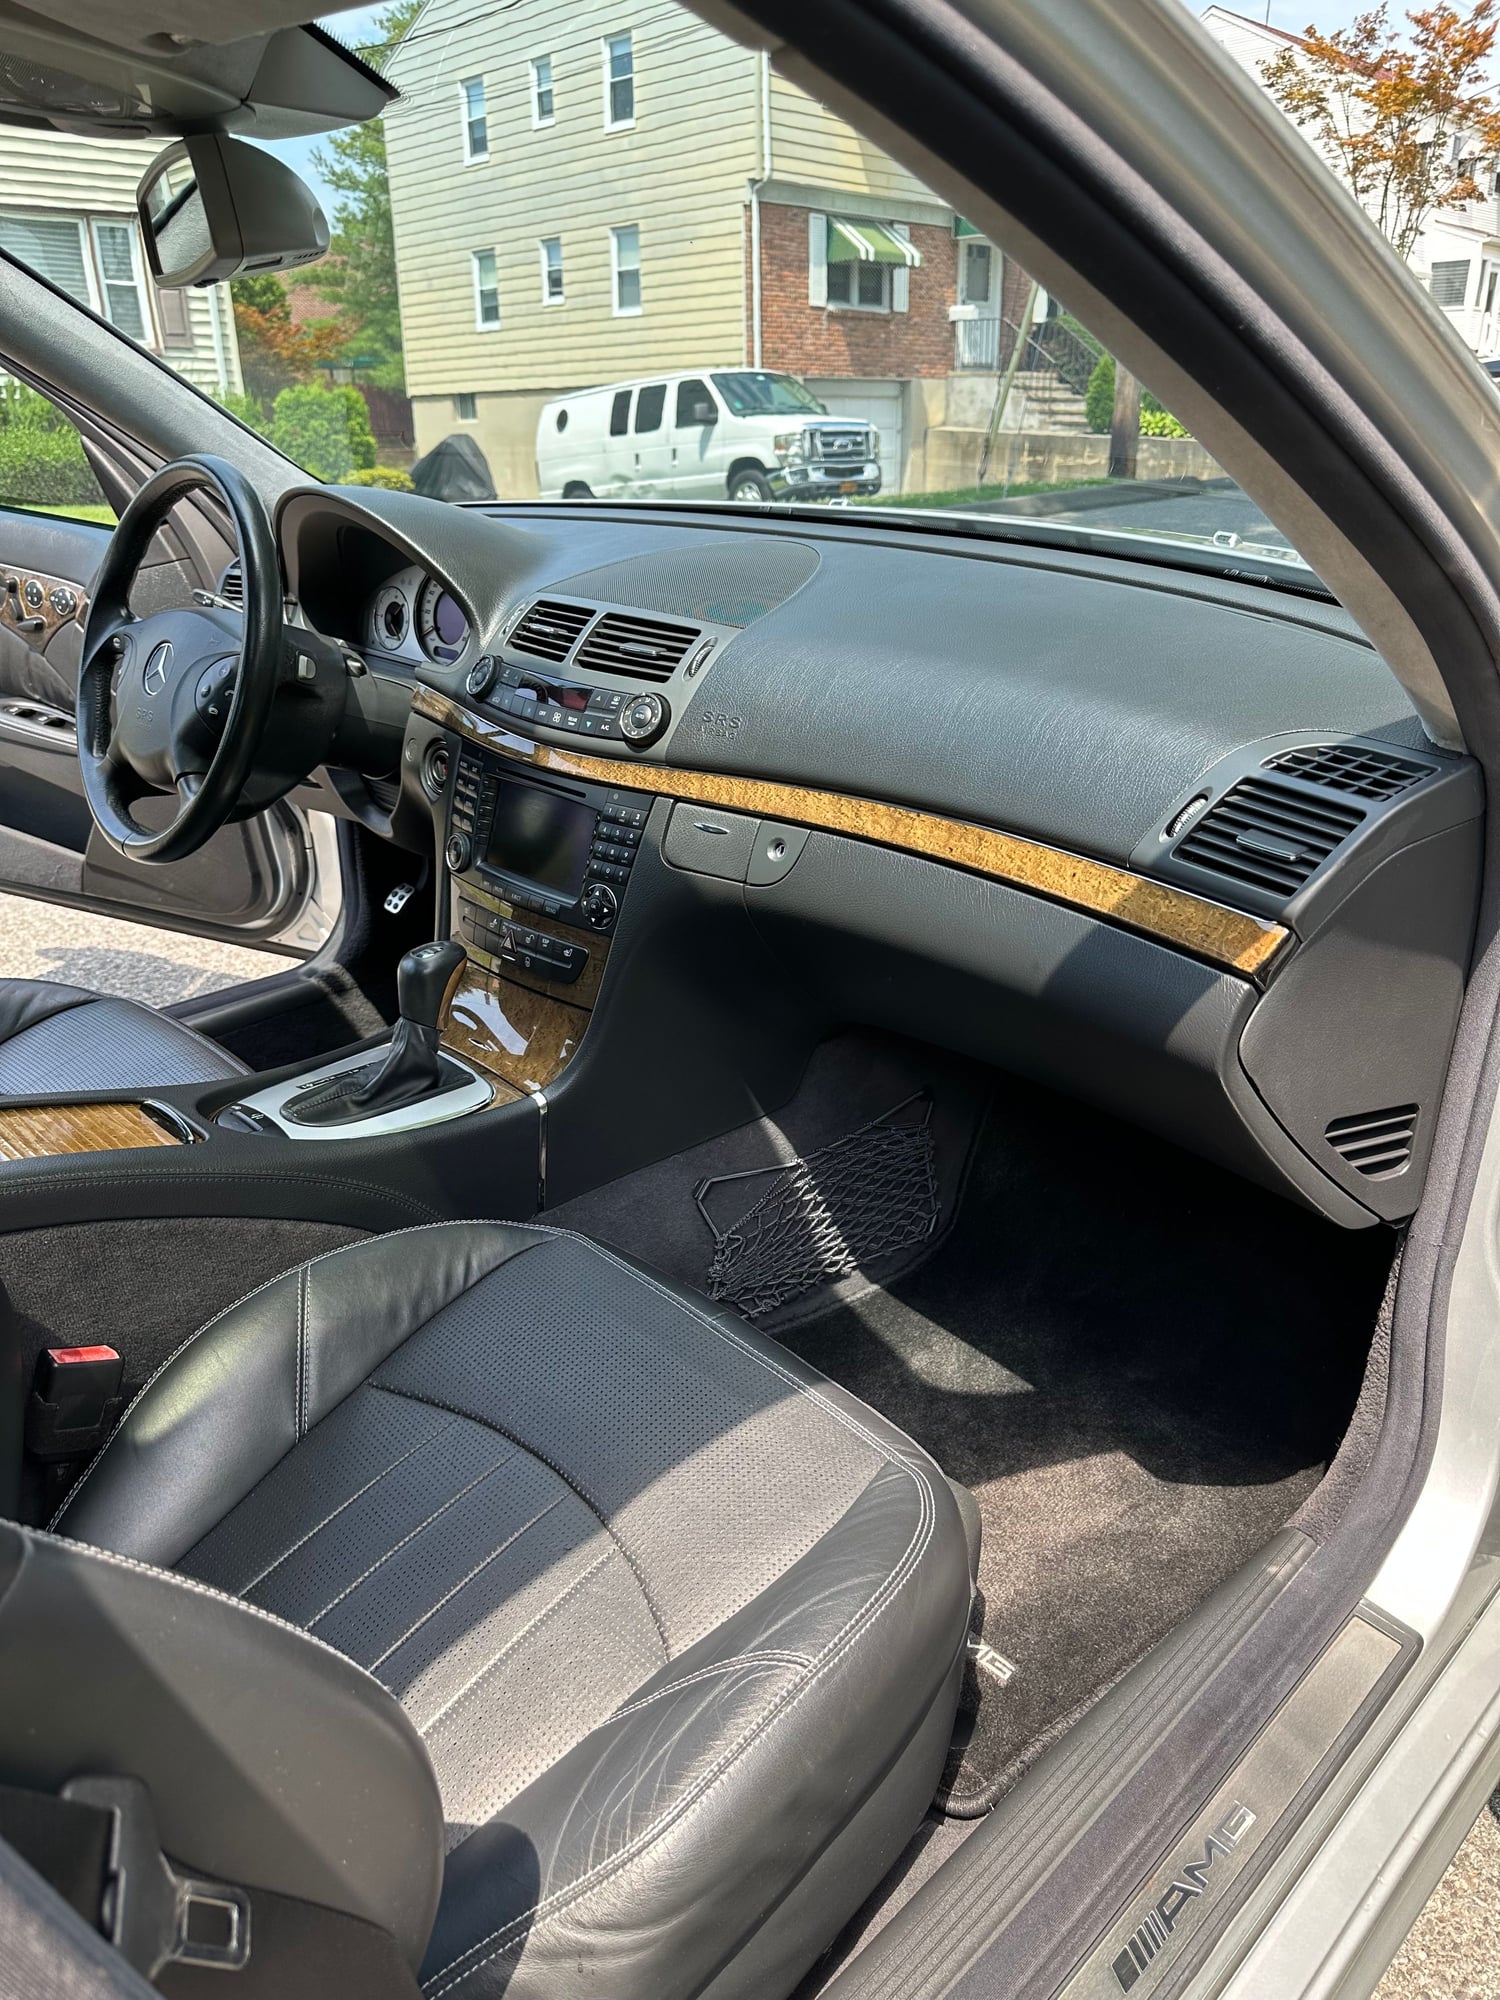 2005 Mercedes-Benz E55 AMG - 2005 Mercedes Benz E55 AMG - Used - VIN WDBUF76J05A78 - 129,000 Miles - 8 cyl - 2WD - Automatic - Sedan - Silver - Port Chester, NY 10573, United States